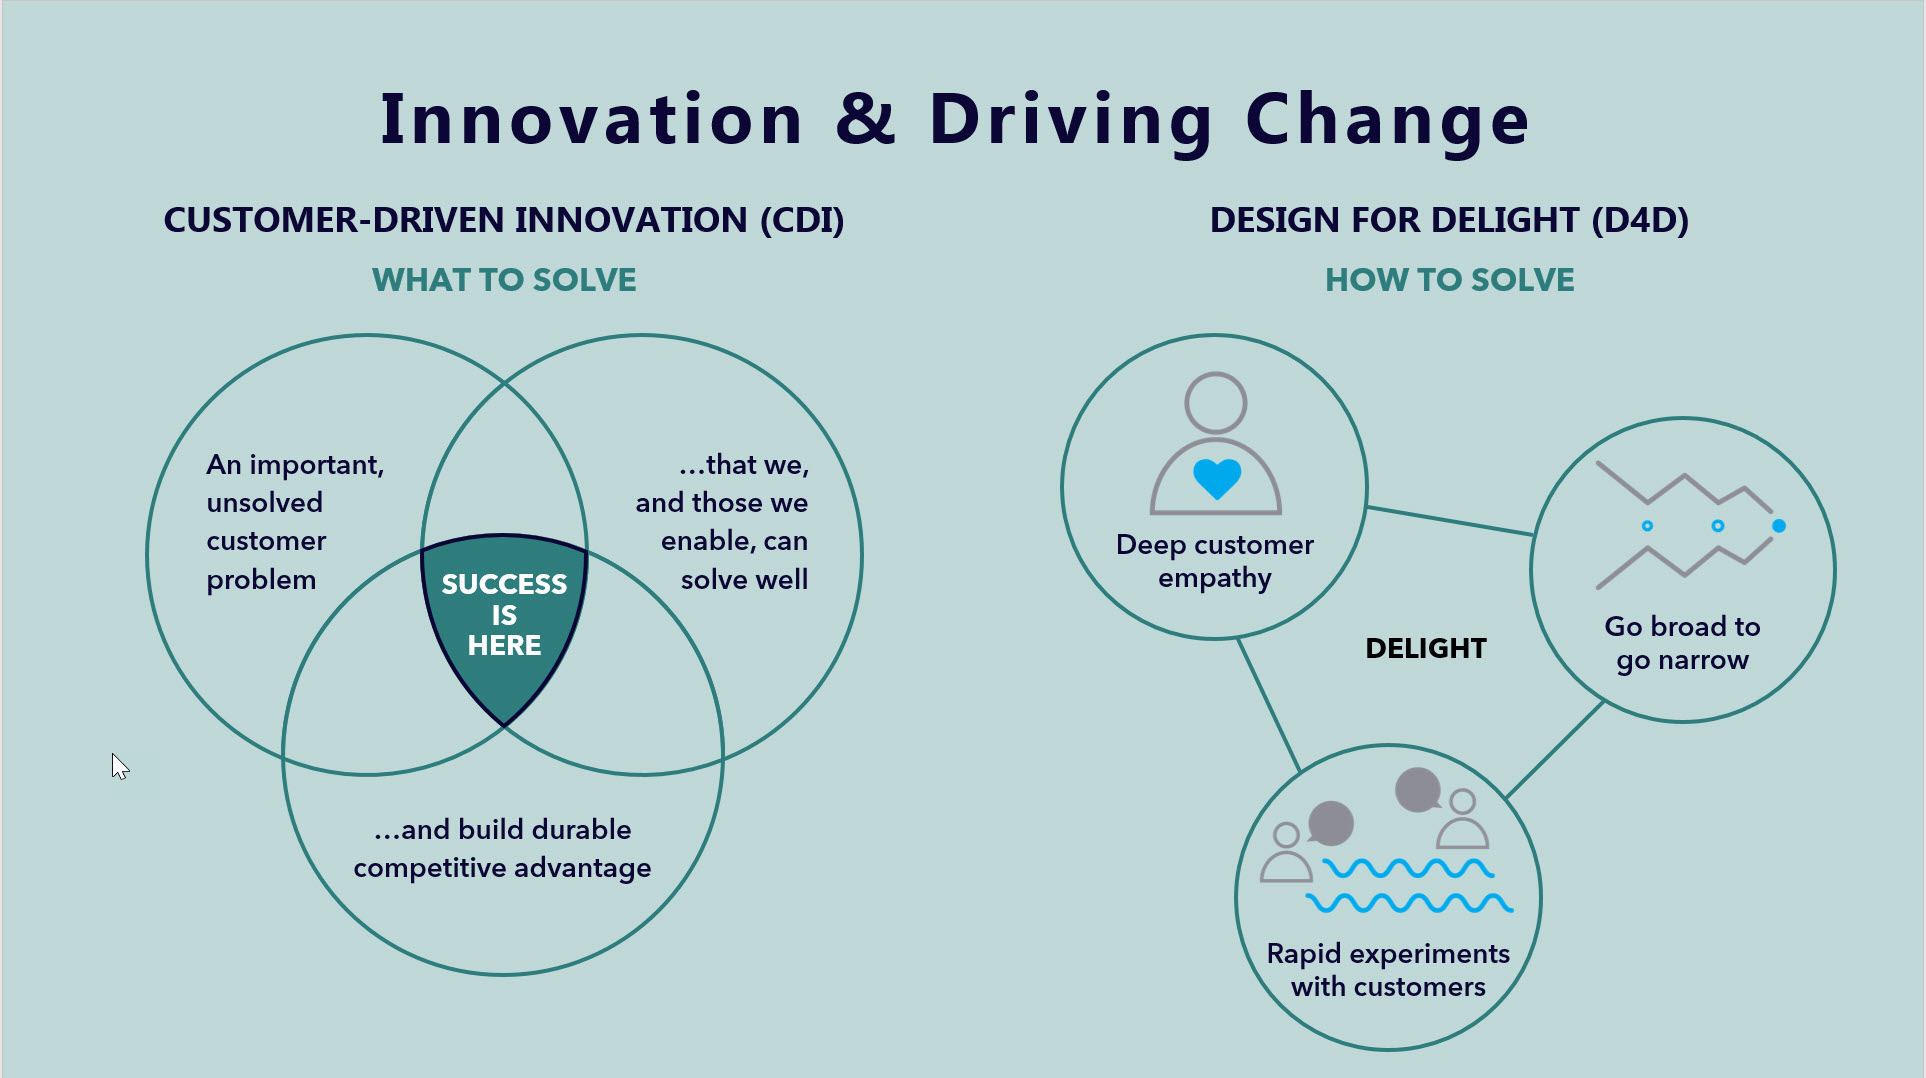 https://braddsmith.com/wp-content/uploads/2021/02/Innovation_and_driving_change.jpg